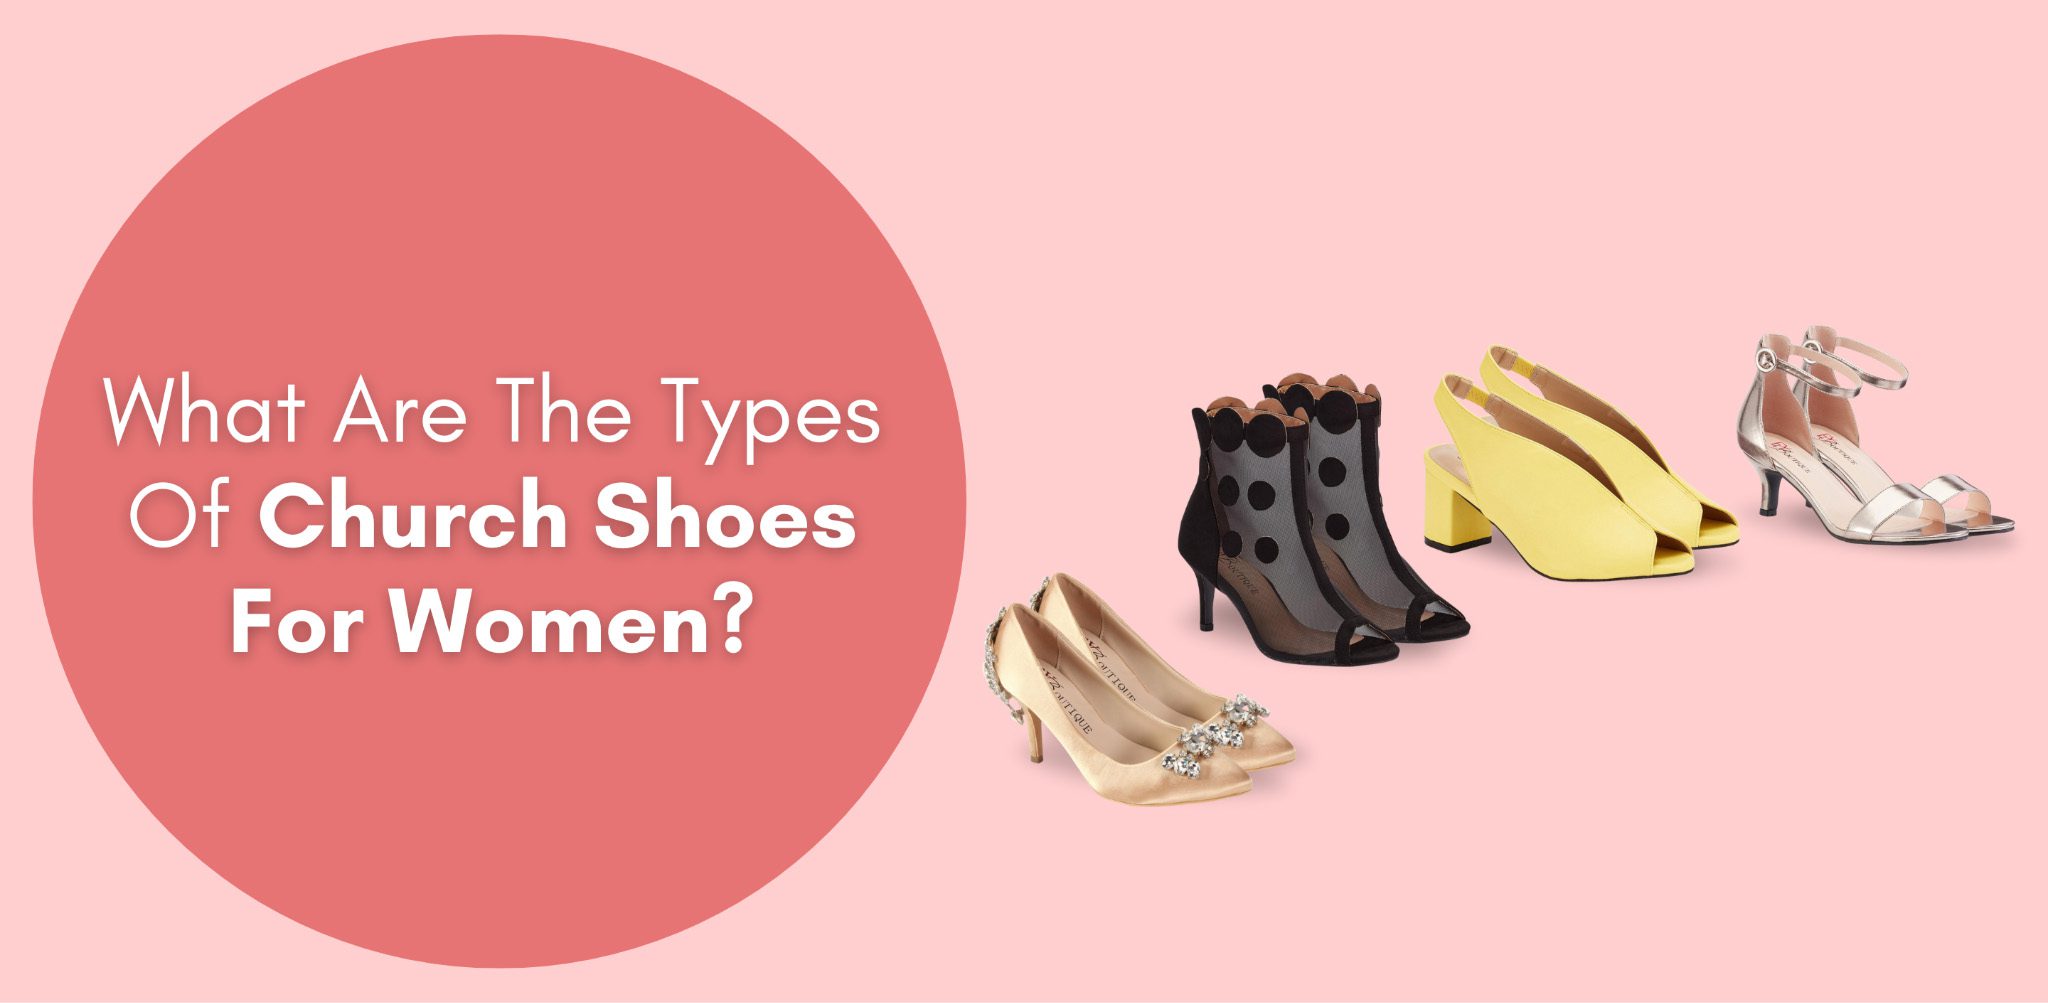 What Are The Types Of Church Shoes For Women?